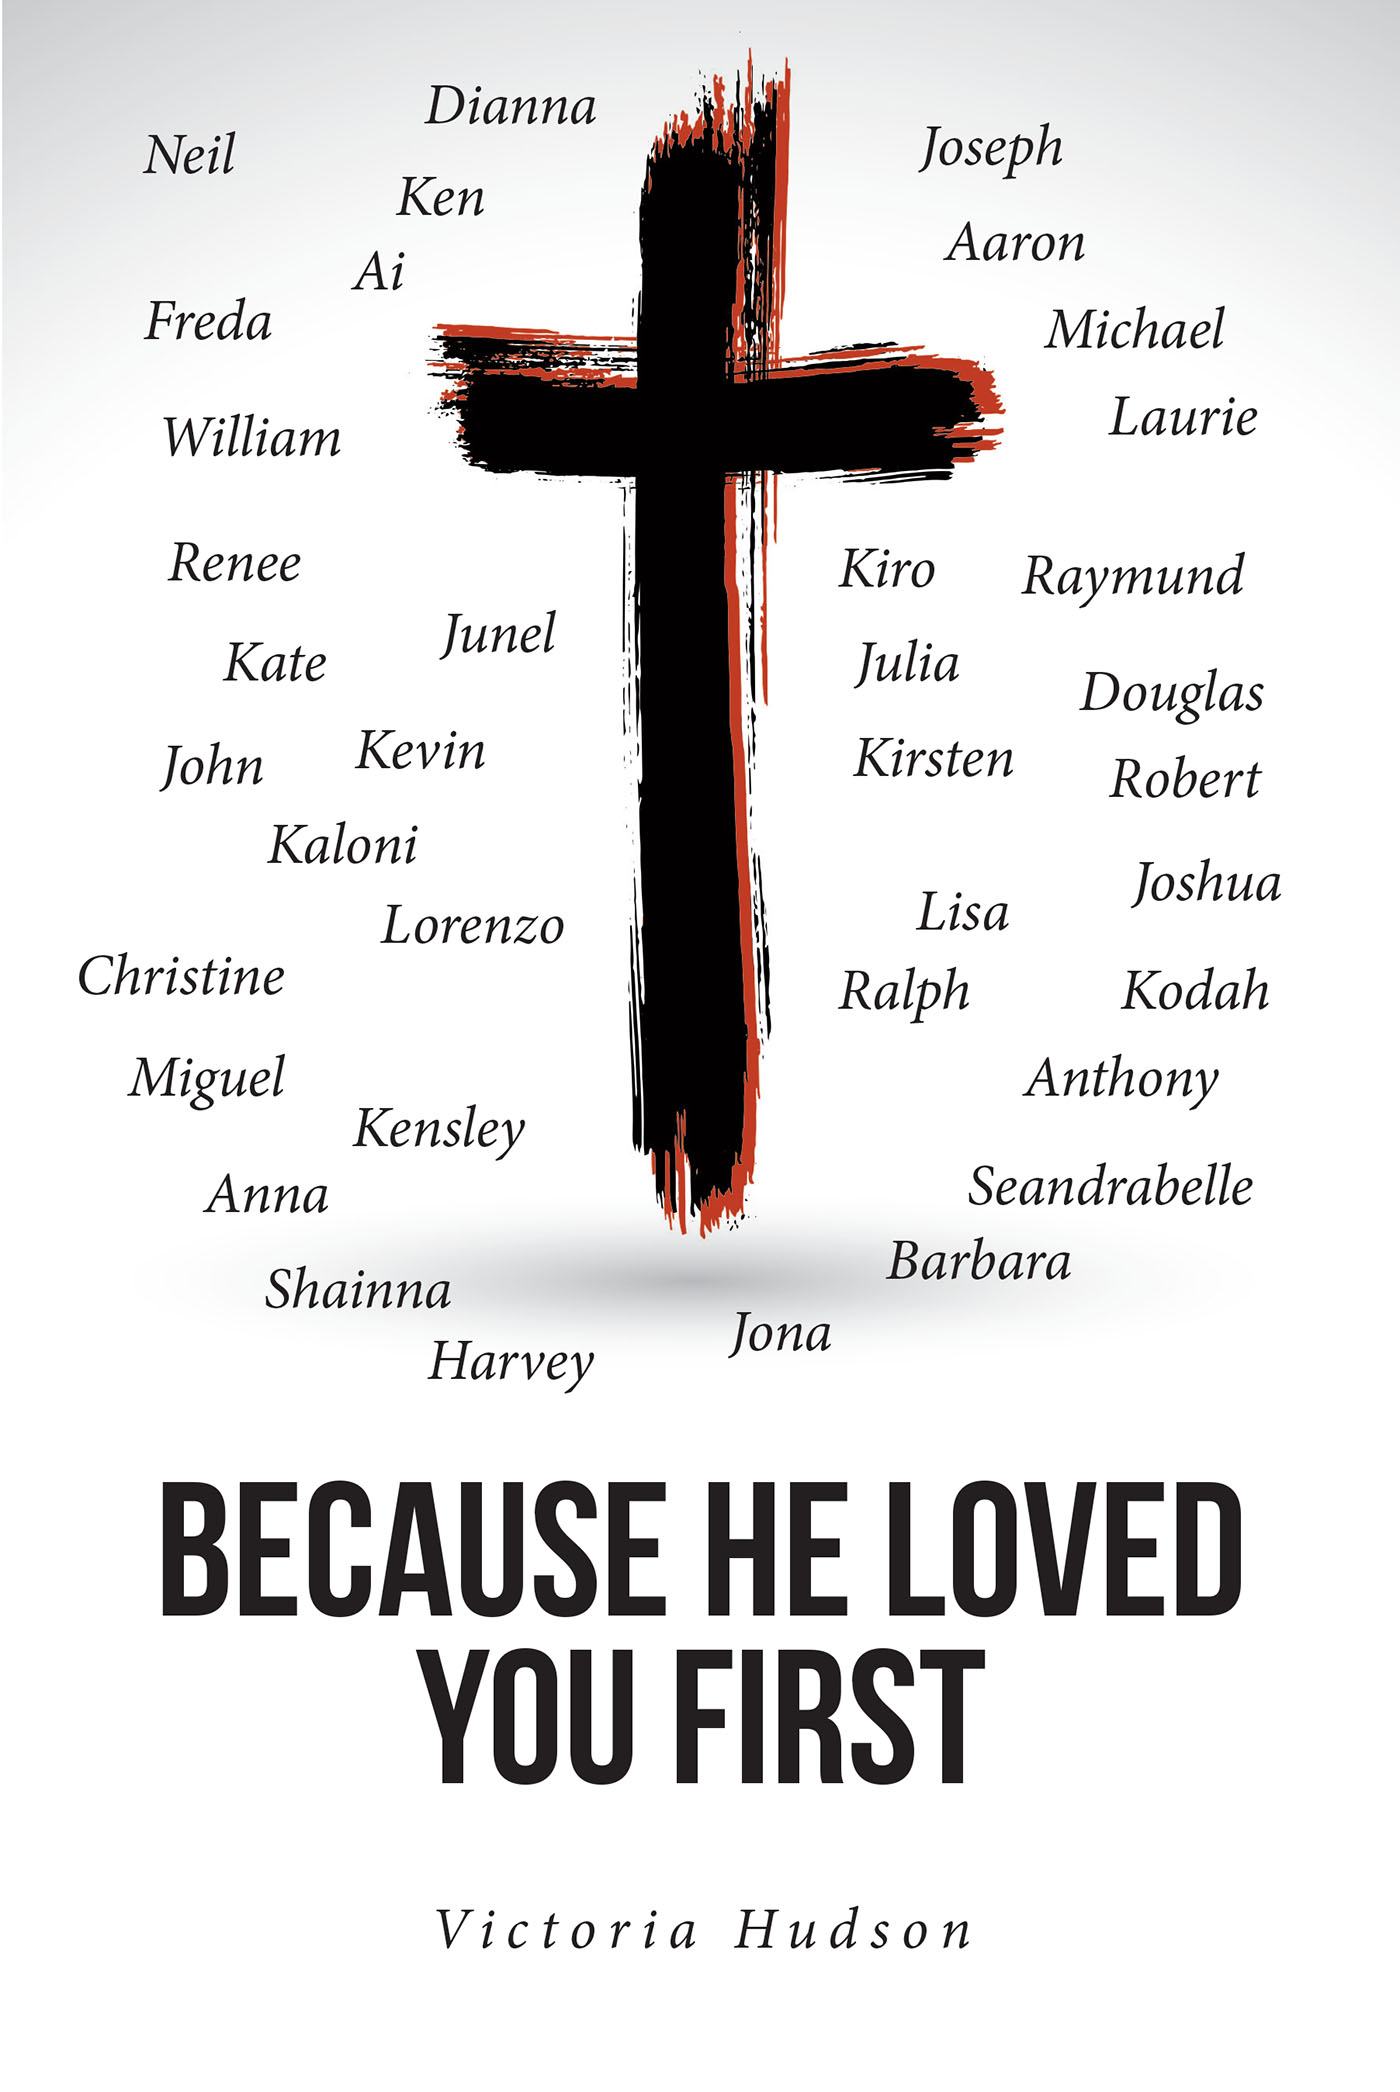 Victoria Hudson’s Newly Released "Because He Loved You First" is a Captivating Resource for Spiritual Enrichment